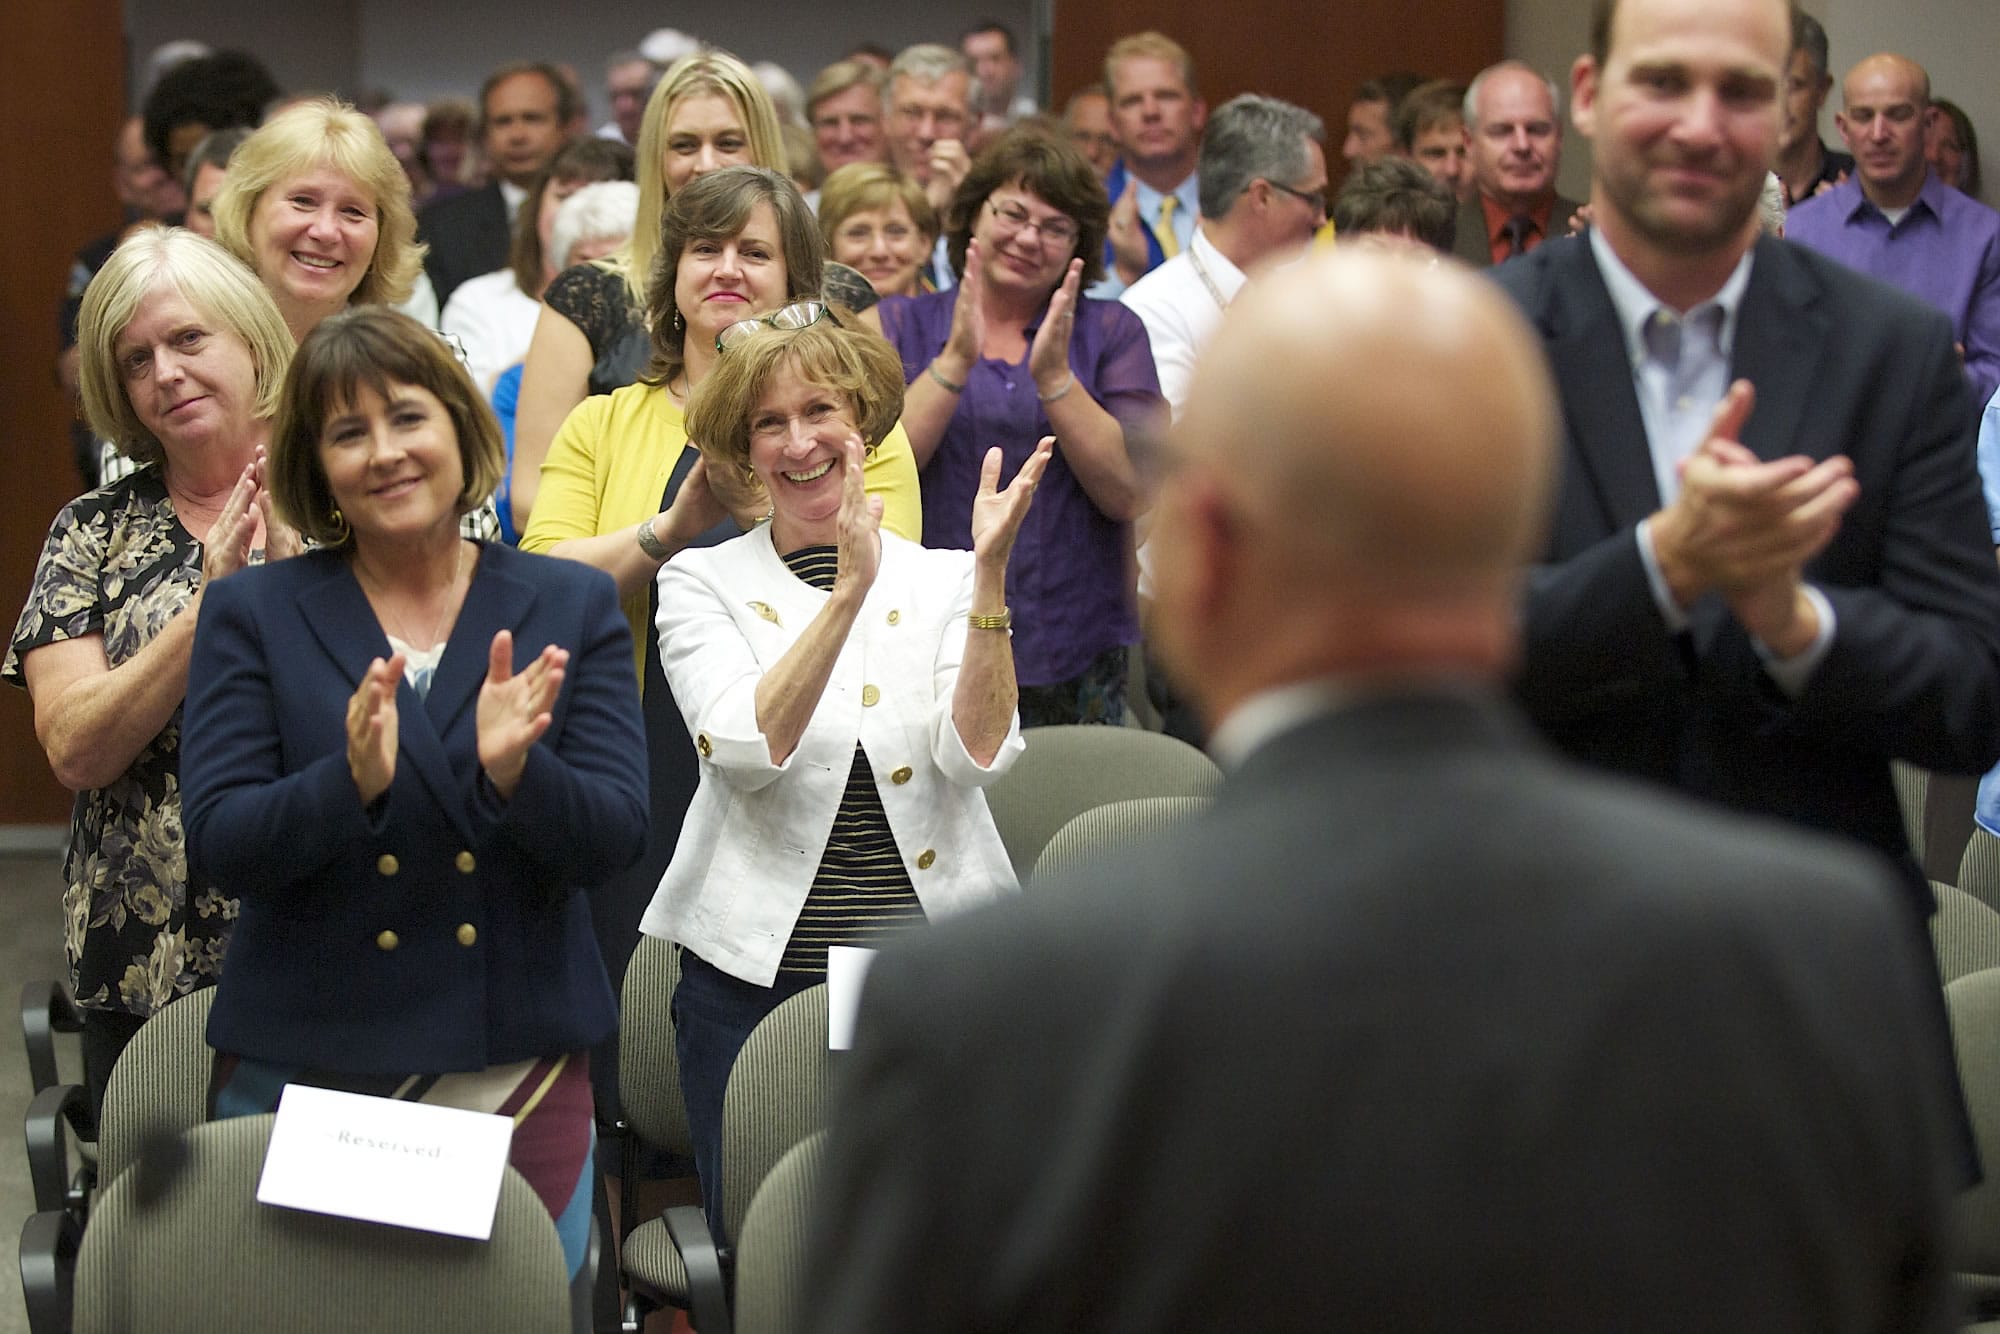 Clark County Administrator Bill Barron looks upon a crowd of over 100 as they applaud him Thursday for his 14 years of service to the county. Former Clark County Commissioner Betty Sue Morris, center in white, said hiring Barron was among her best decisions as a commissioner.